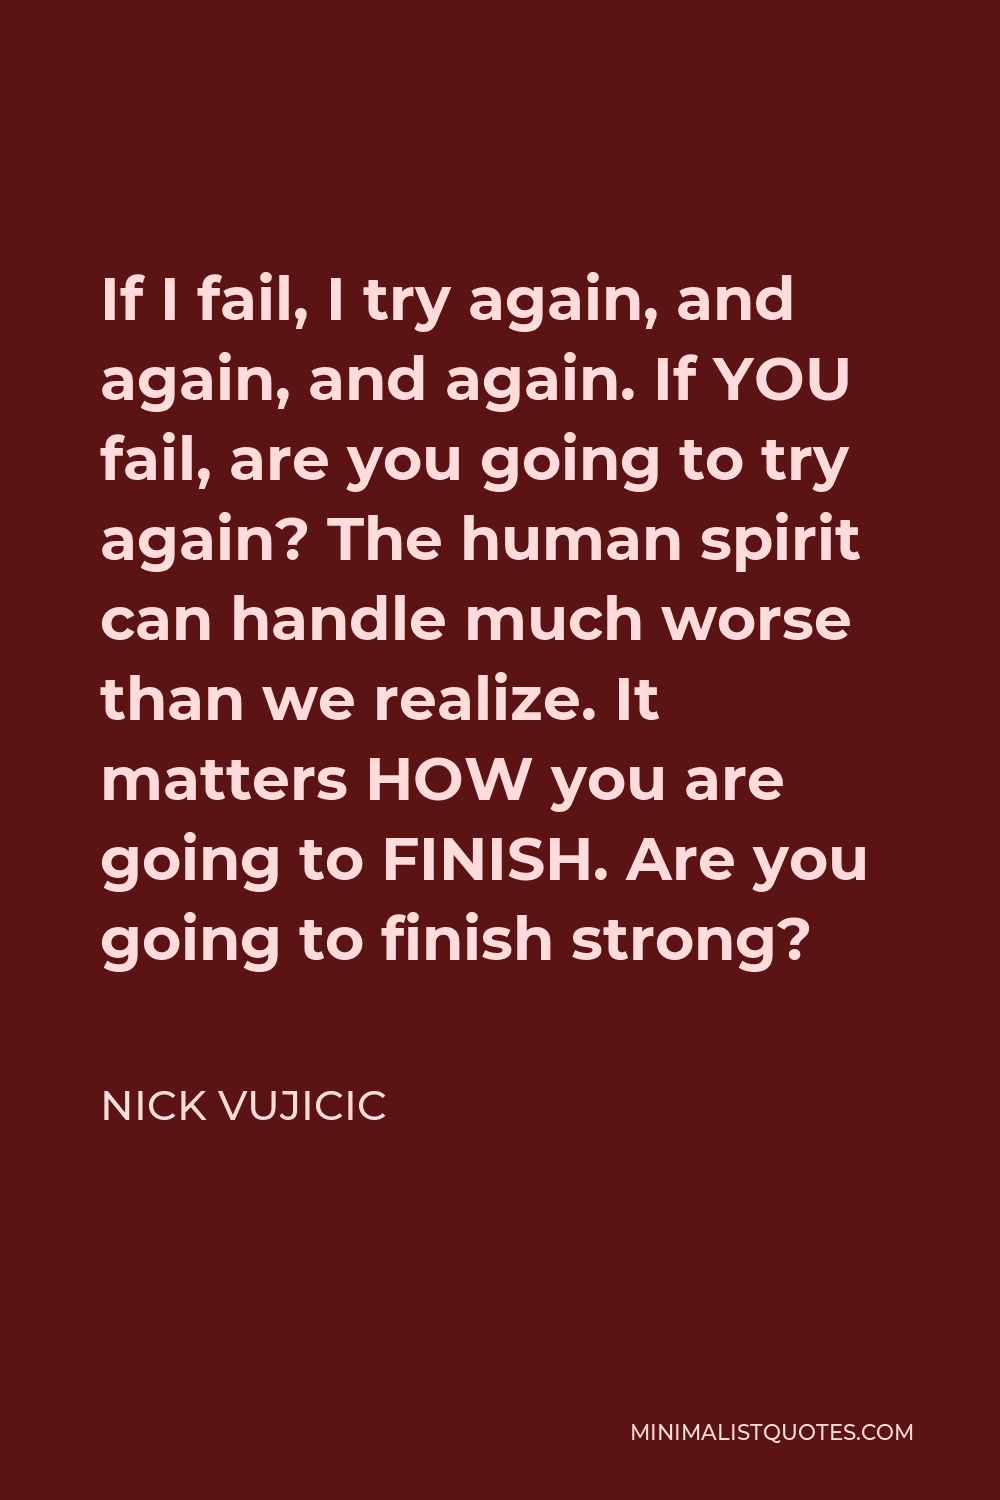 Nick Vujicic Quote - If I fail, I try again, and again, and again.